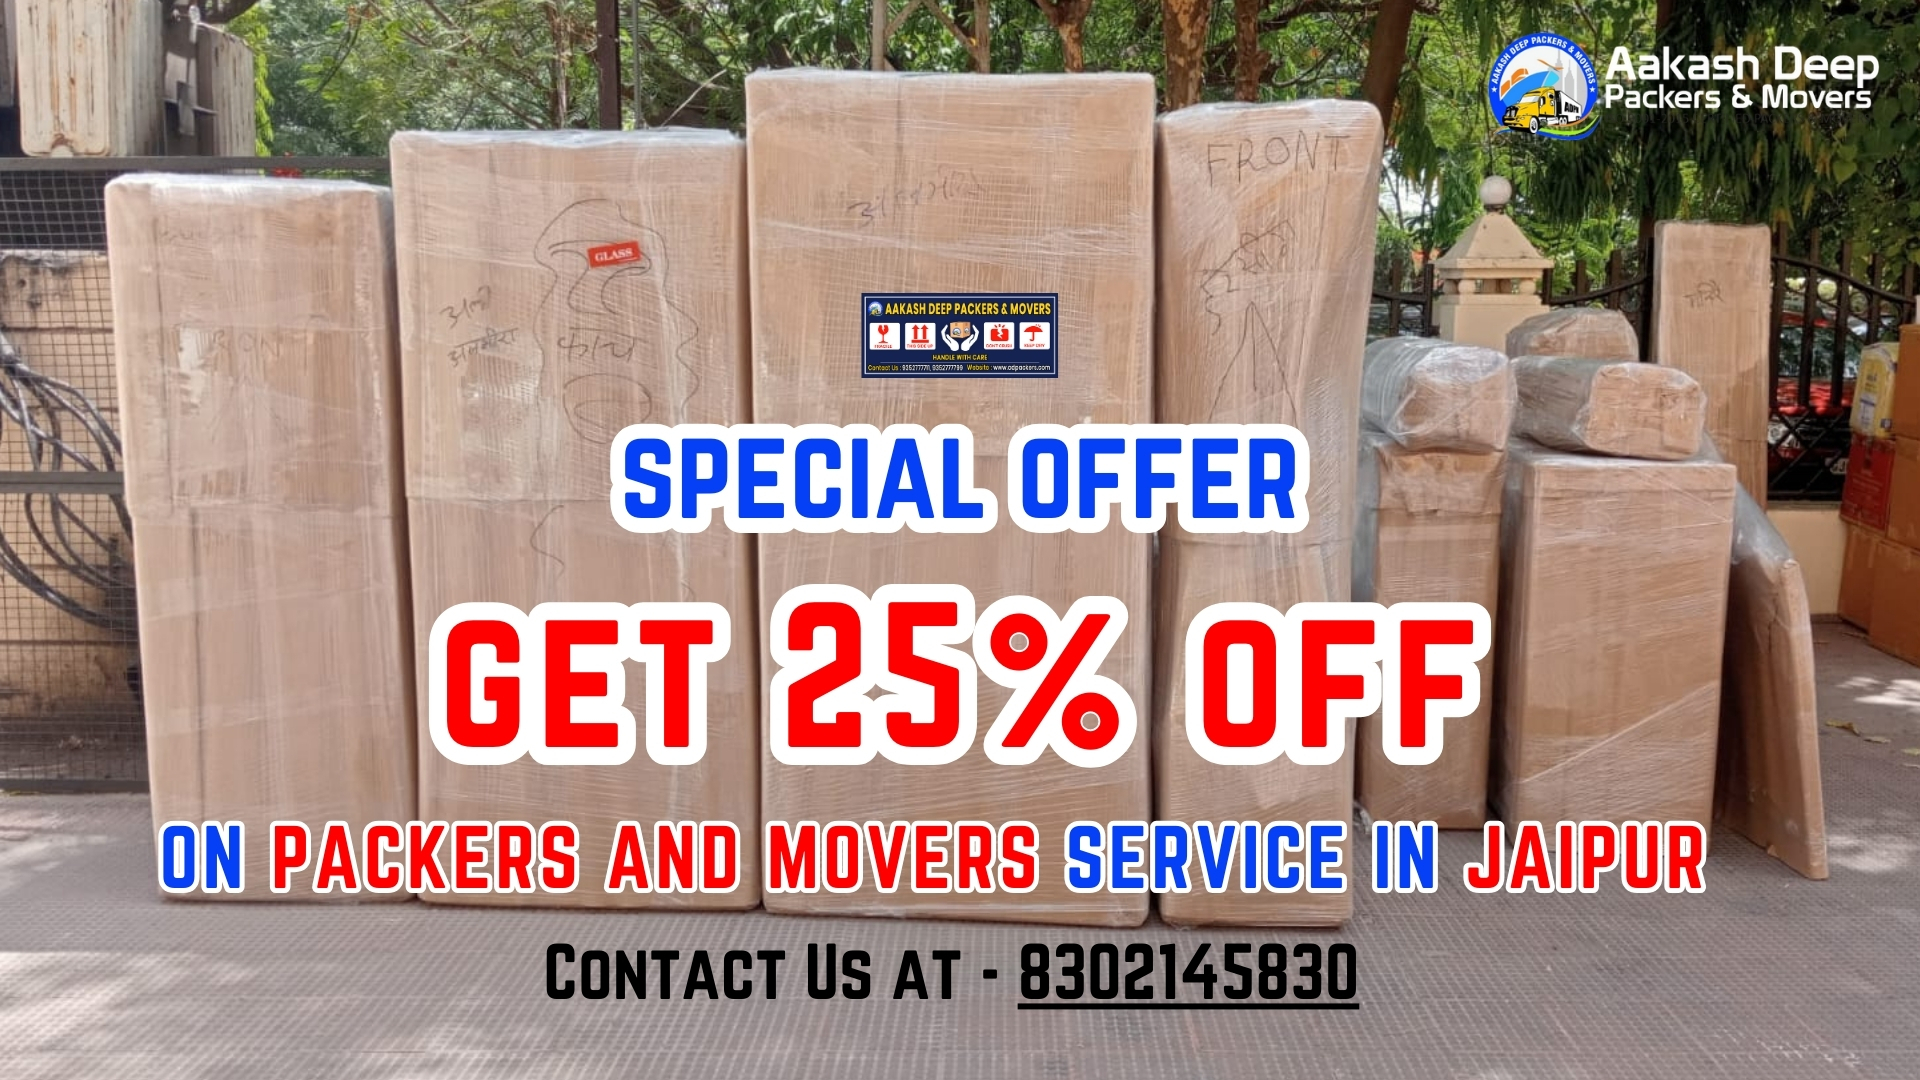 Packers and Movers in Jaipur Offer